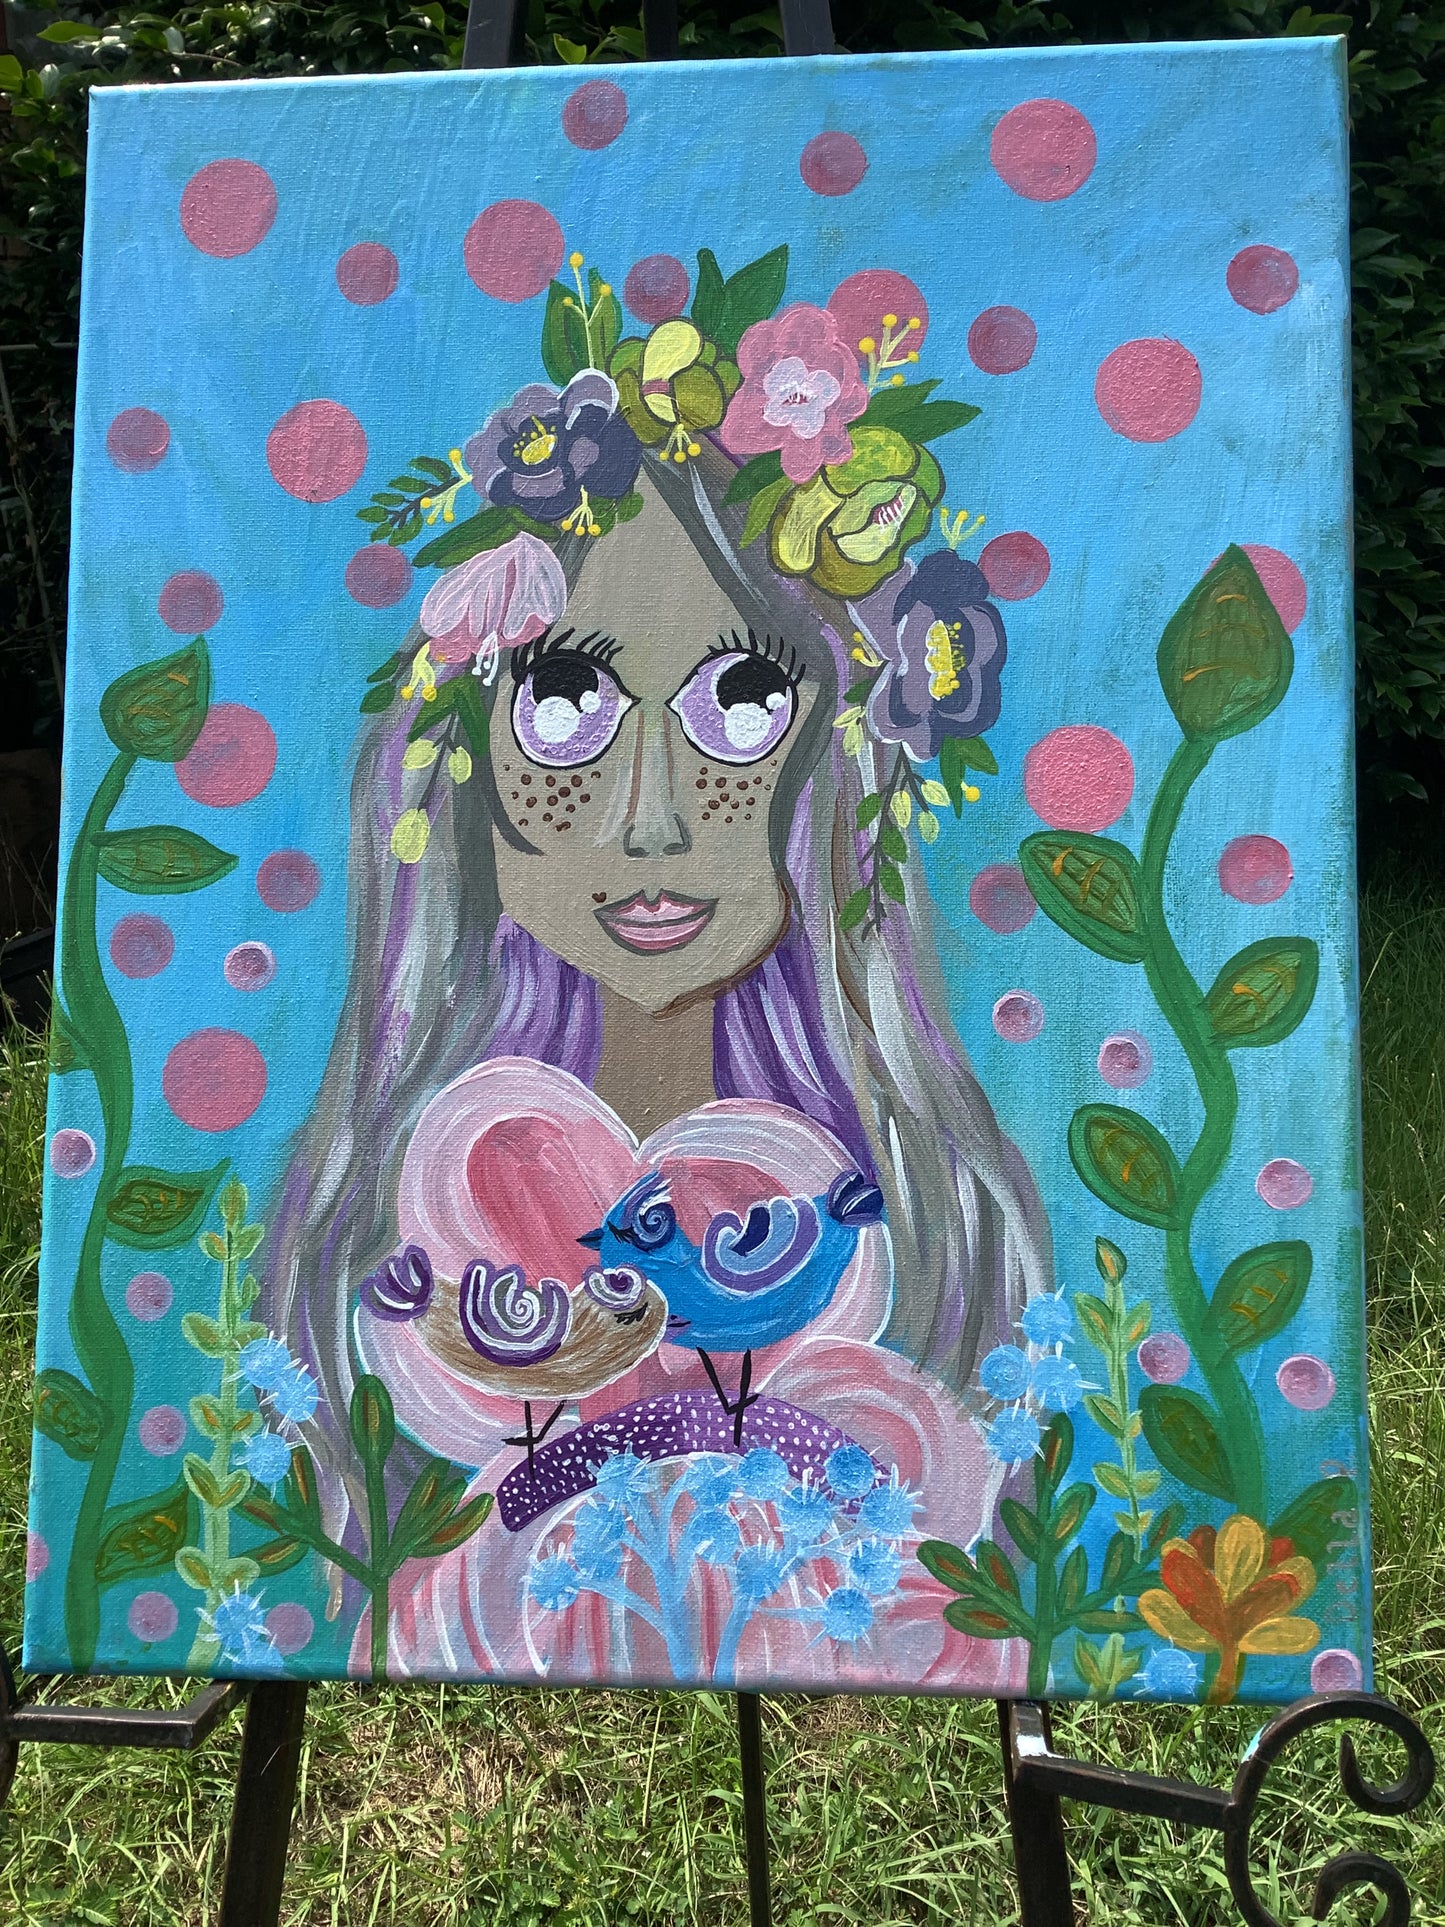 She Cares 16" x 20"